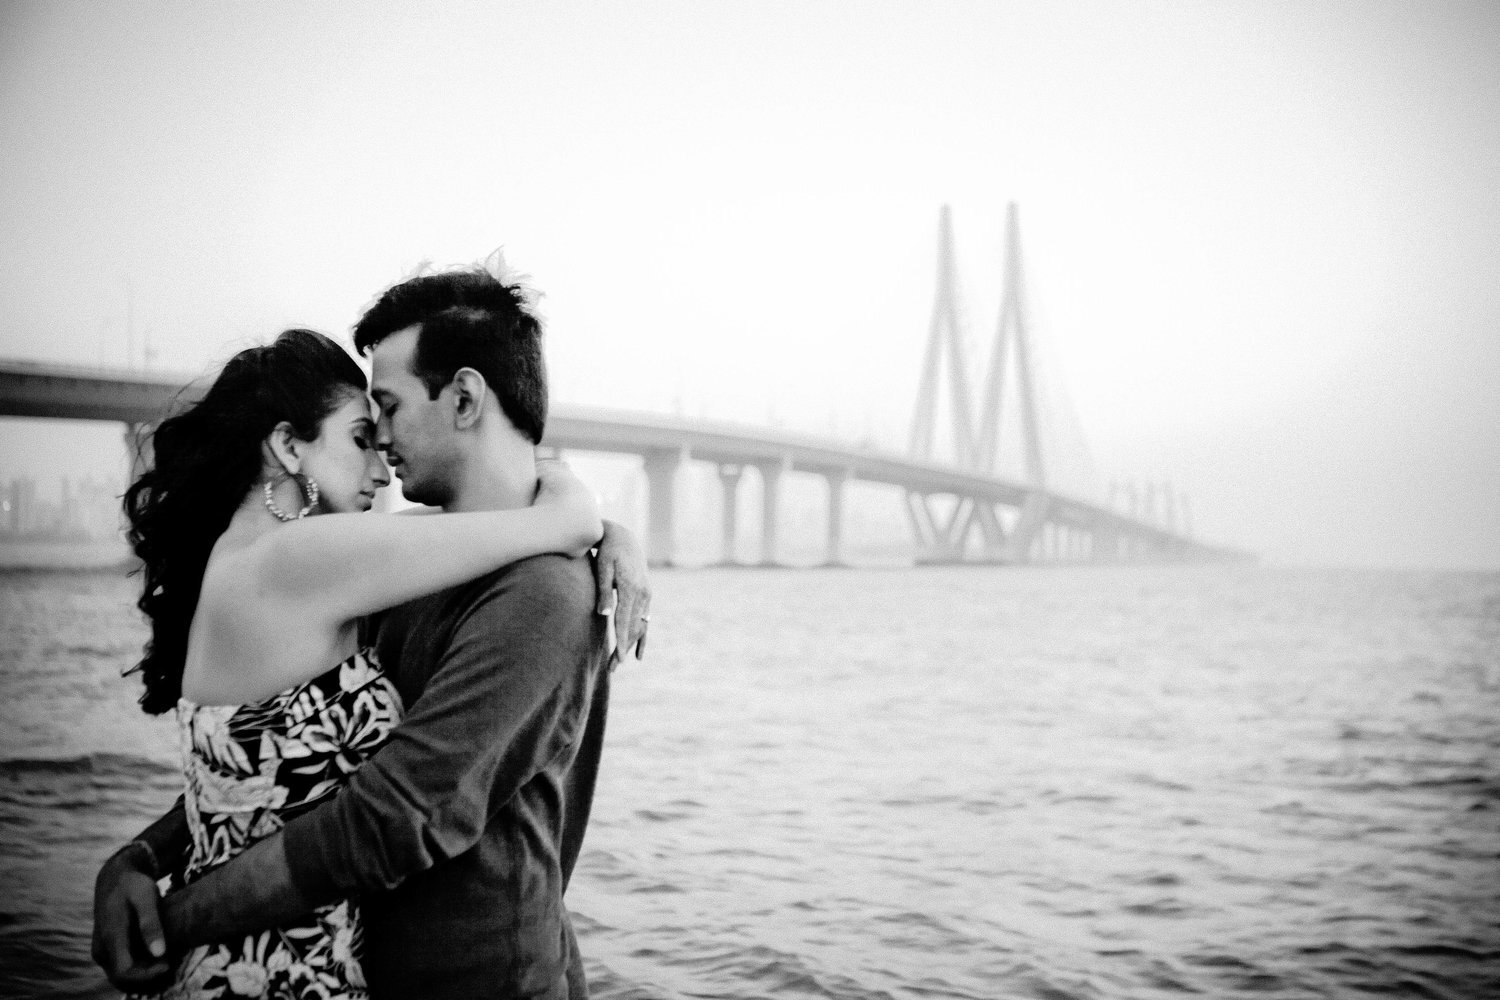 PLANNING FOR THE PERFECT PRE-WEDDING SHOOT?